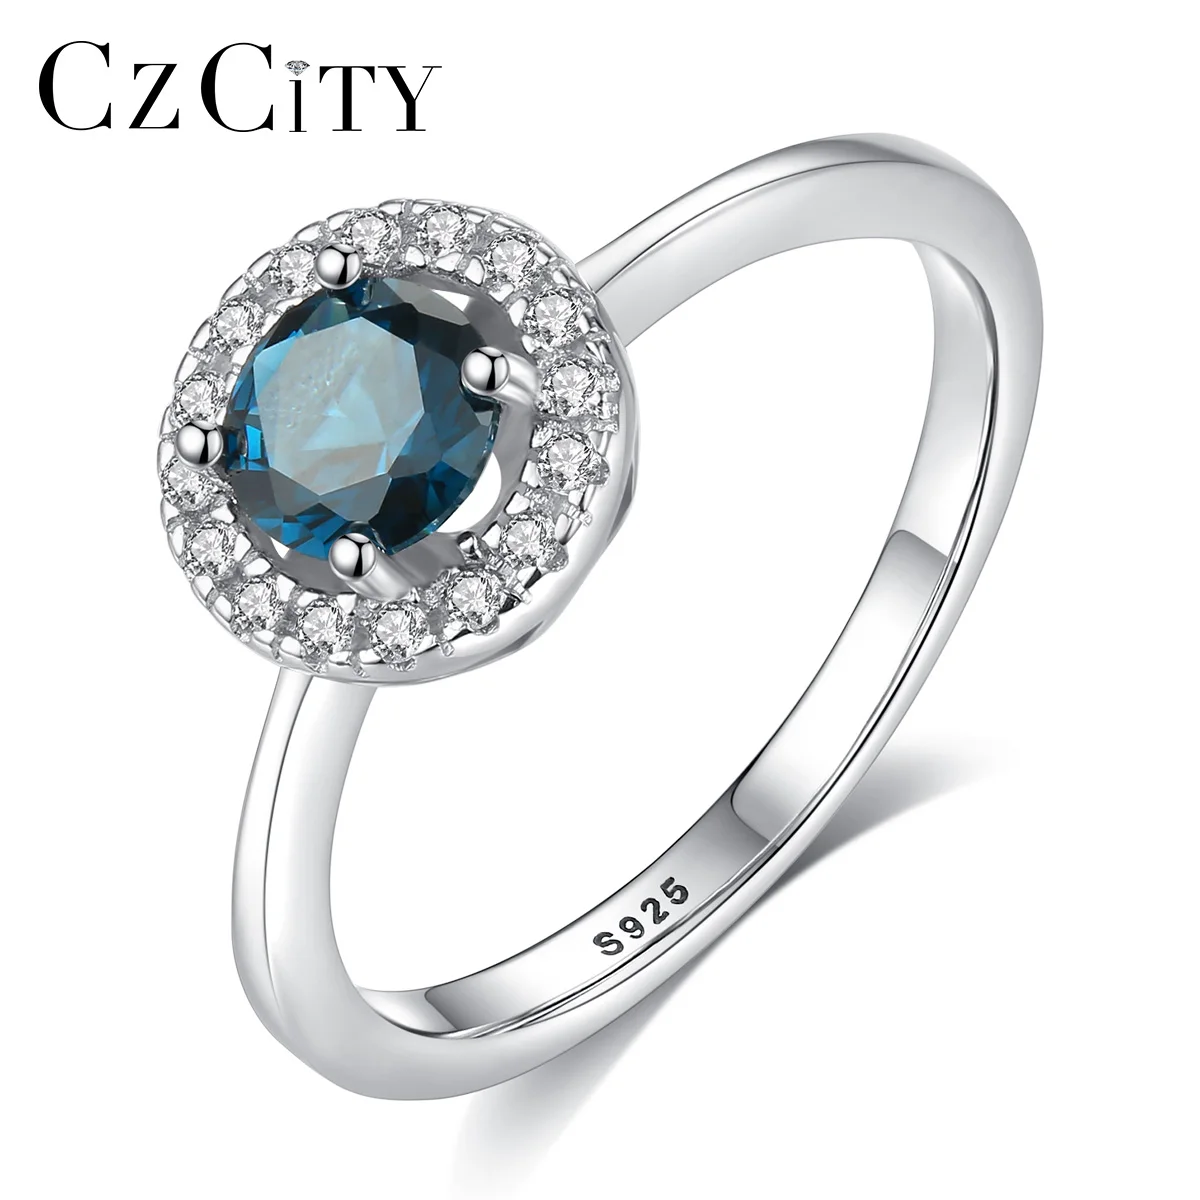 

CZCITY White Gold Plated Zircon Engagement Ring Elaborate S925 Sterling Silver Round Gemstone CZ Ring